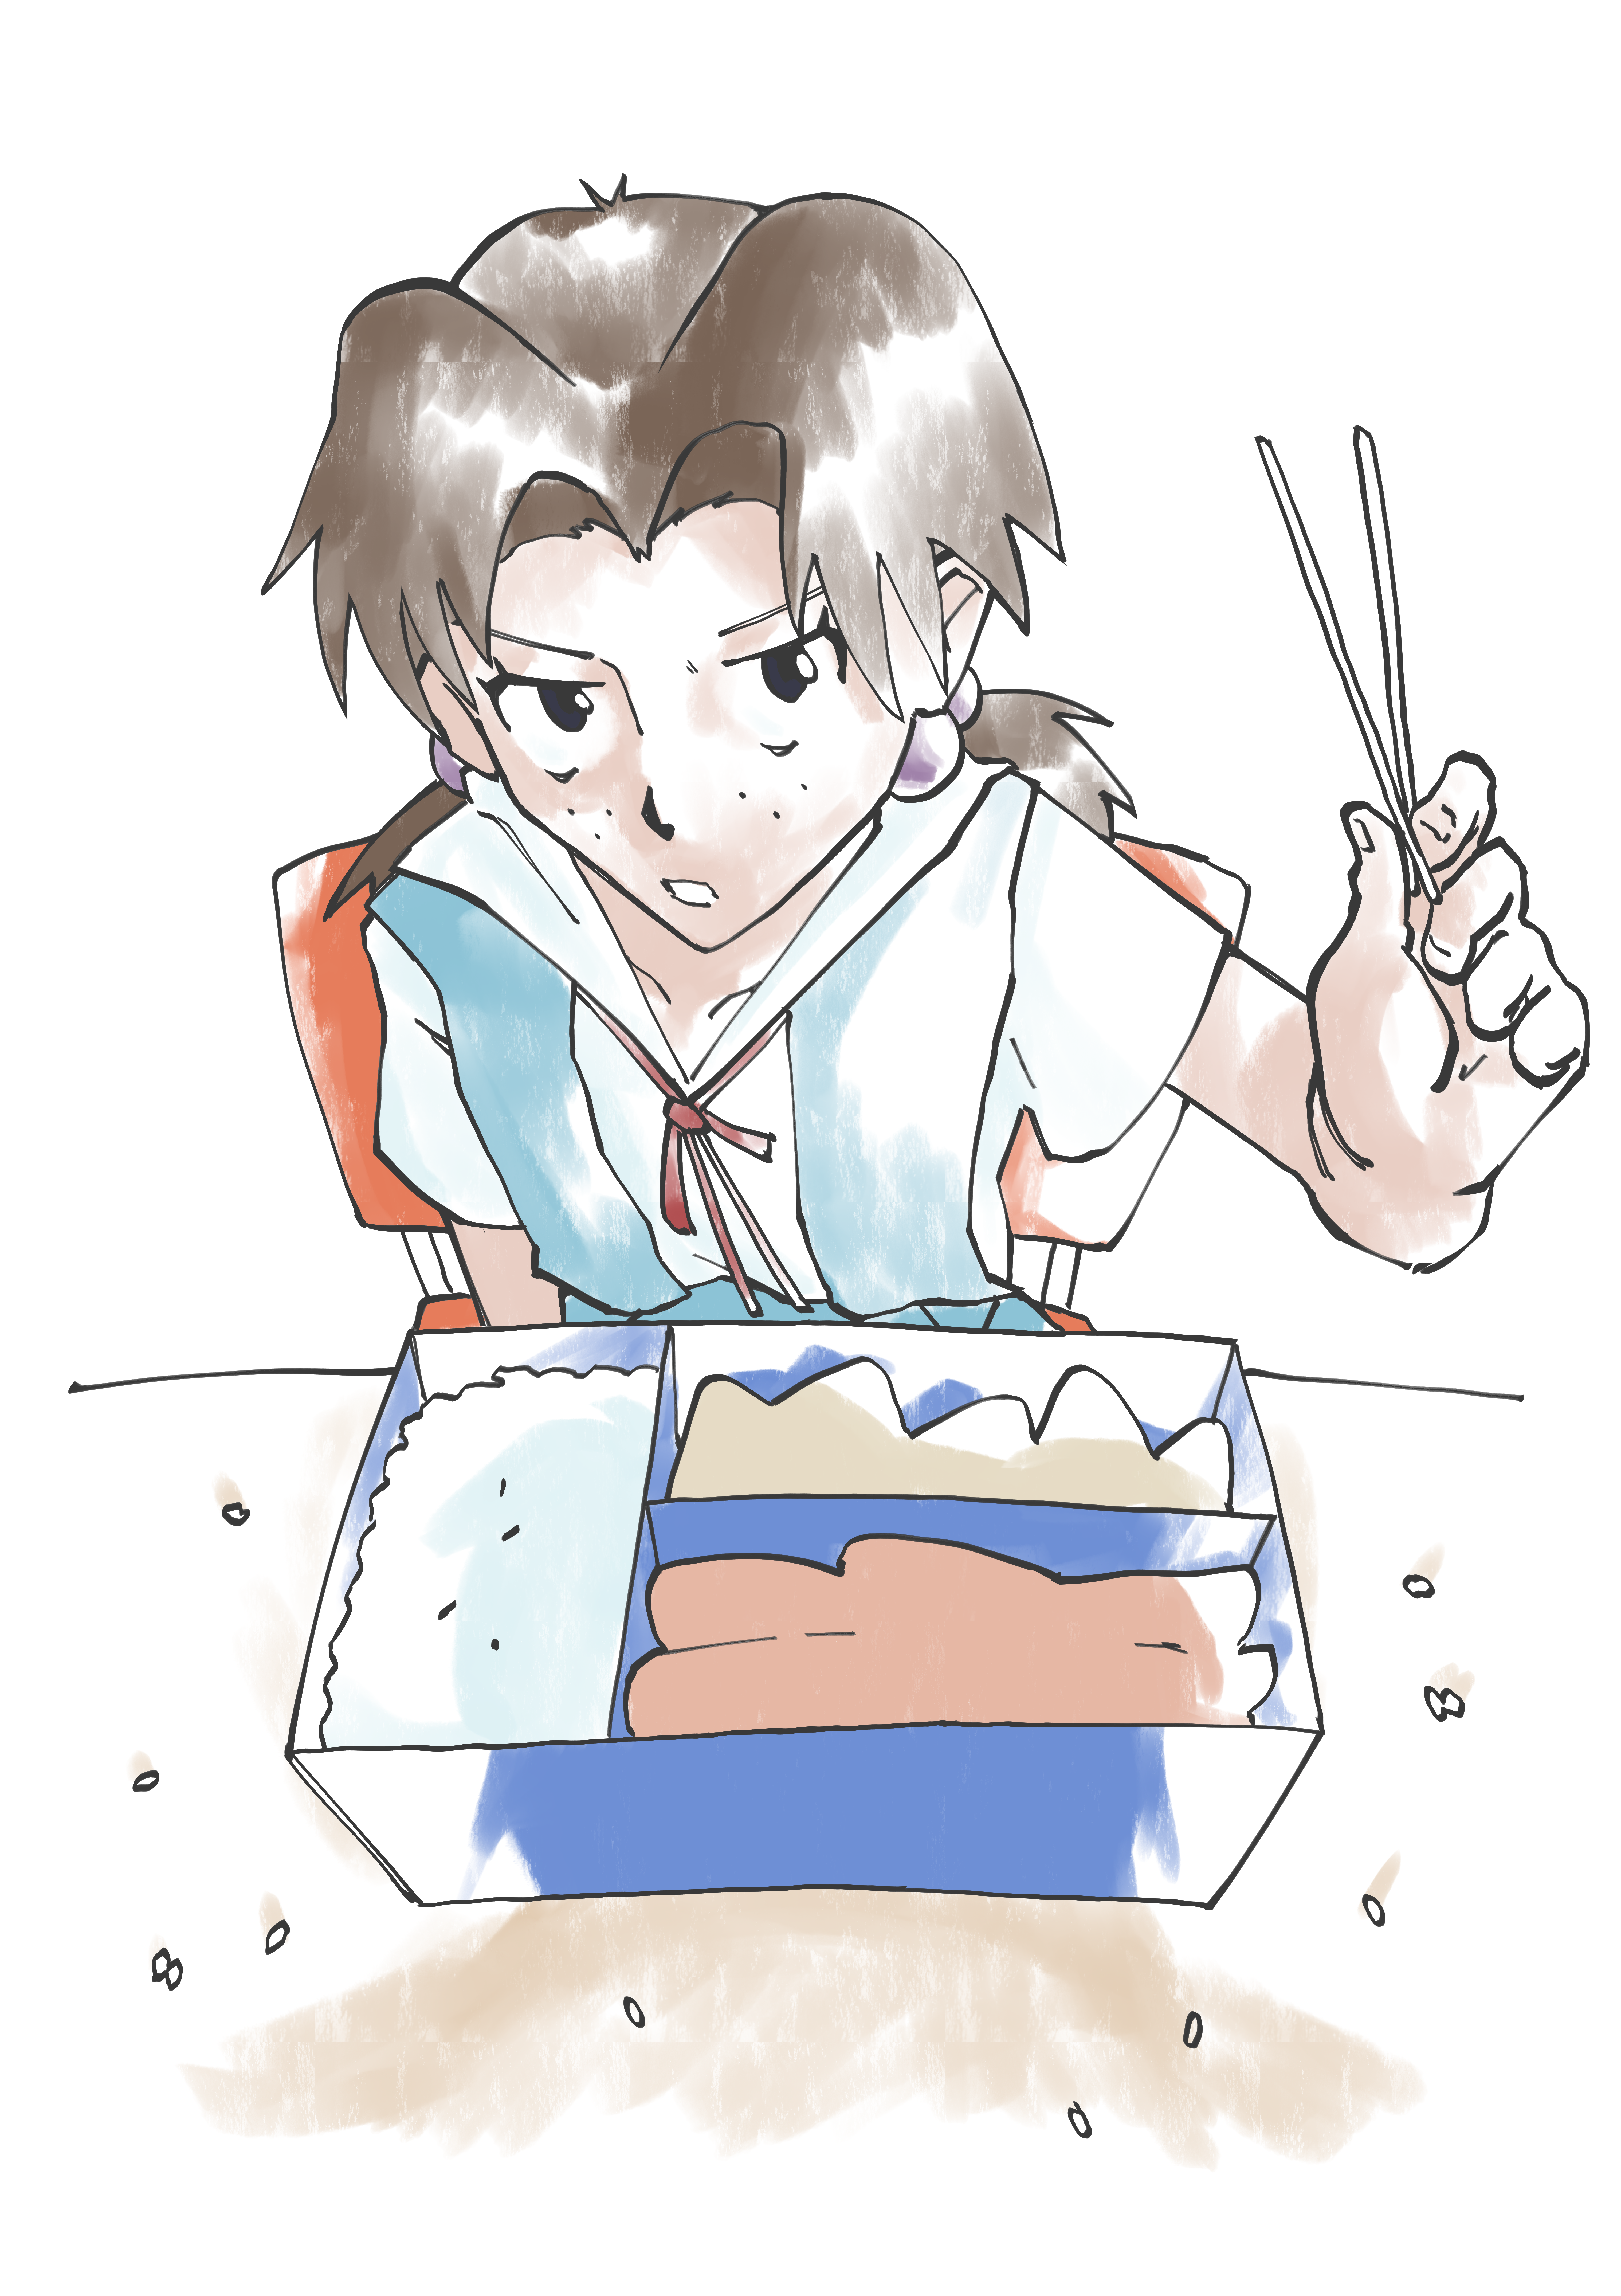 Hikari Horaki, holding chopsticks in front of her lunch box. Rice is spilled all over the table.